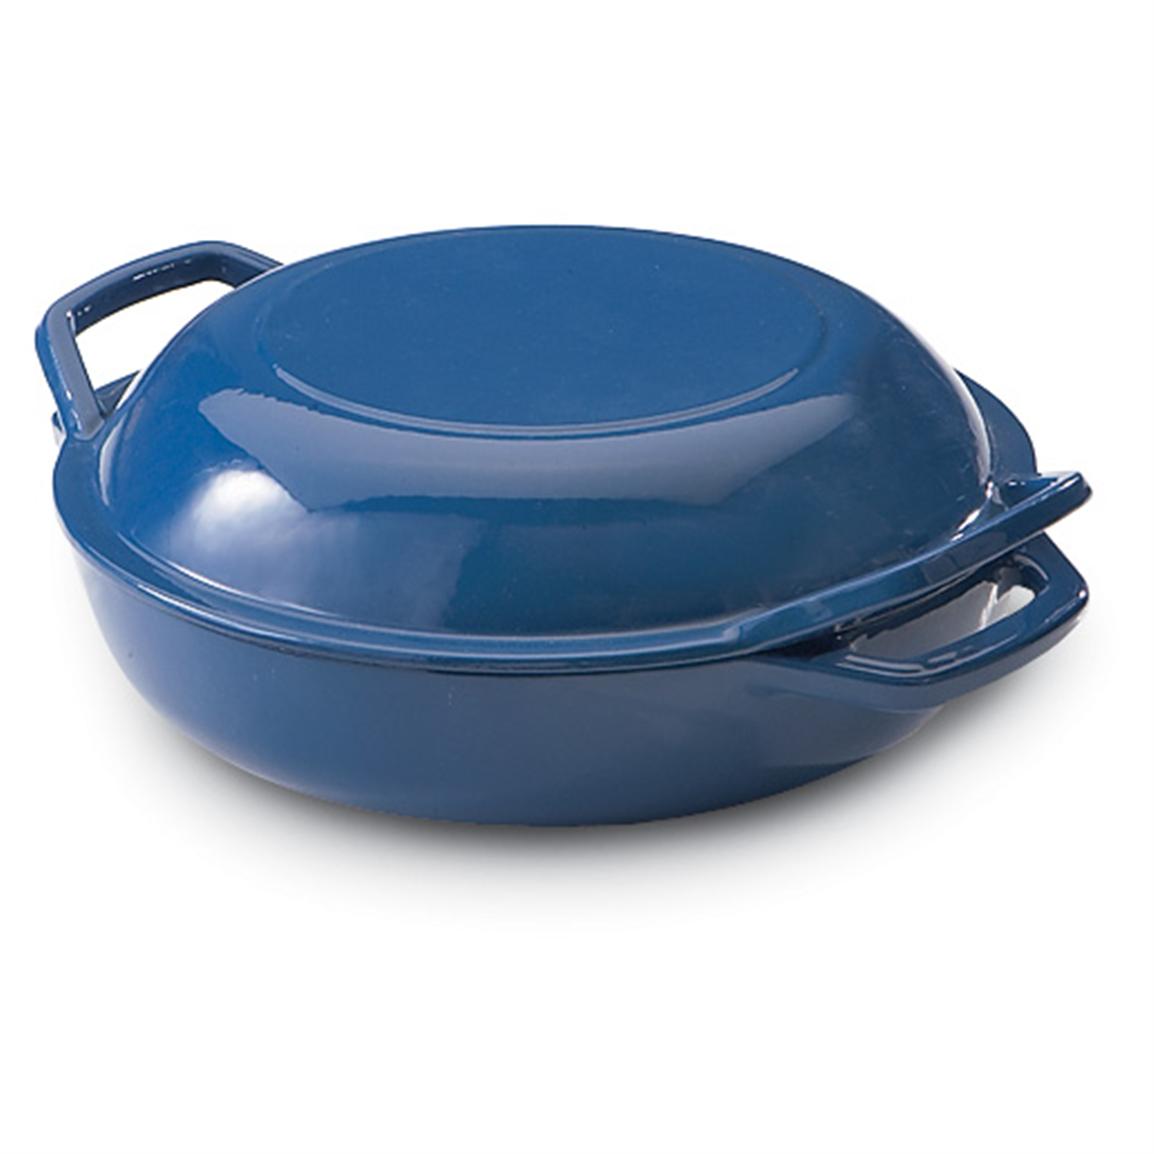 3 1/2 - qt. Dutch Oven with Lid - 97576, Cast Iron at